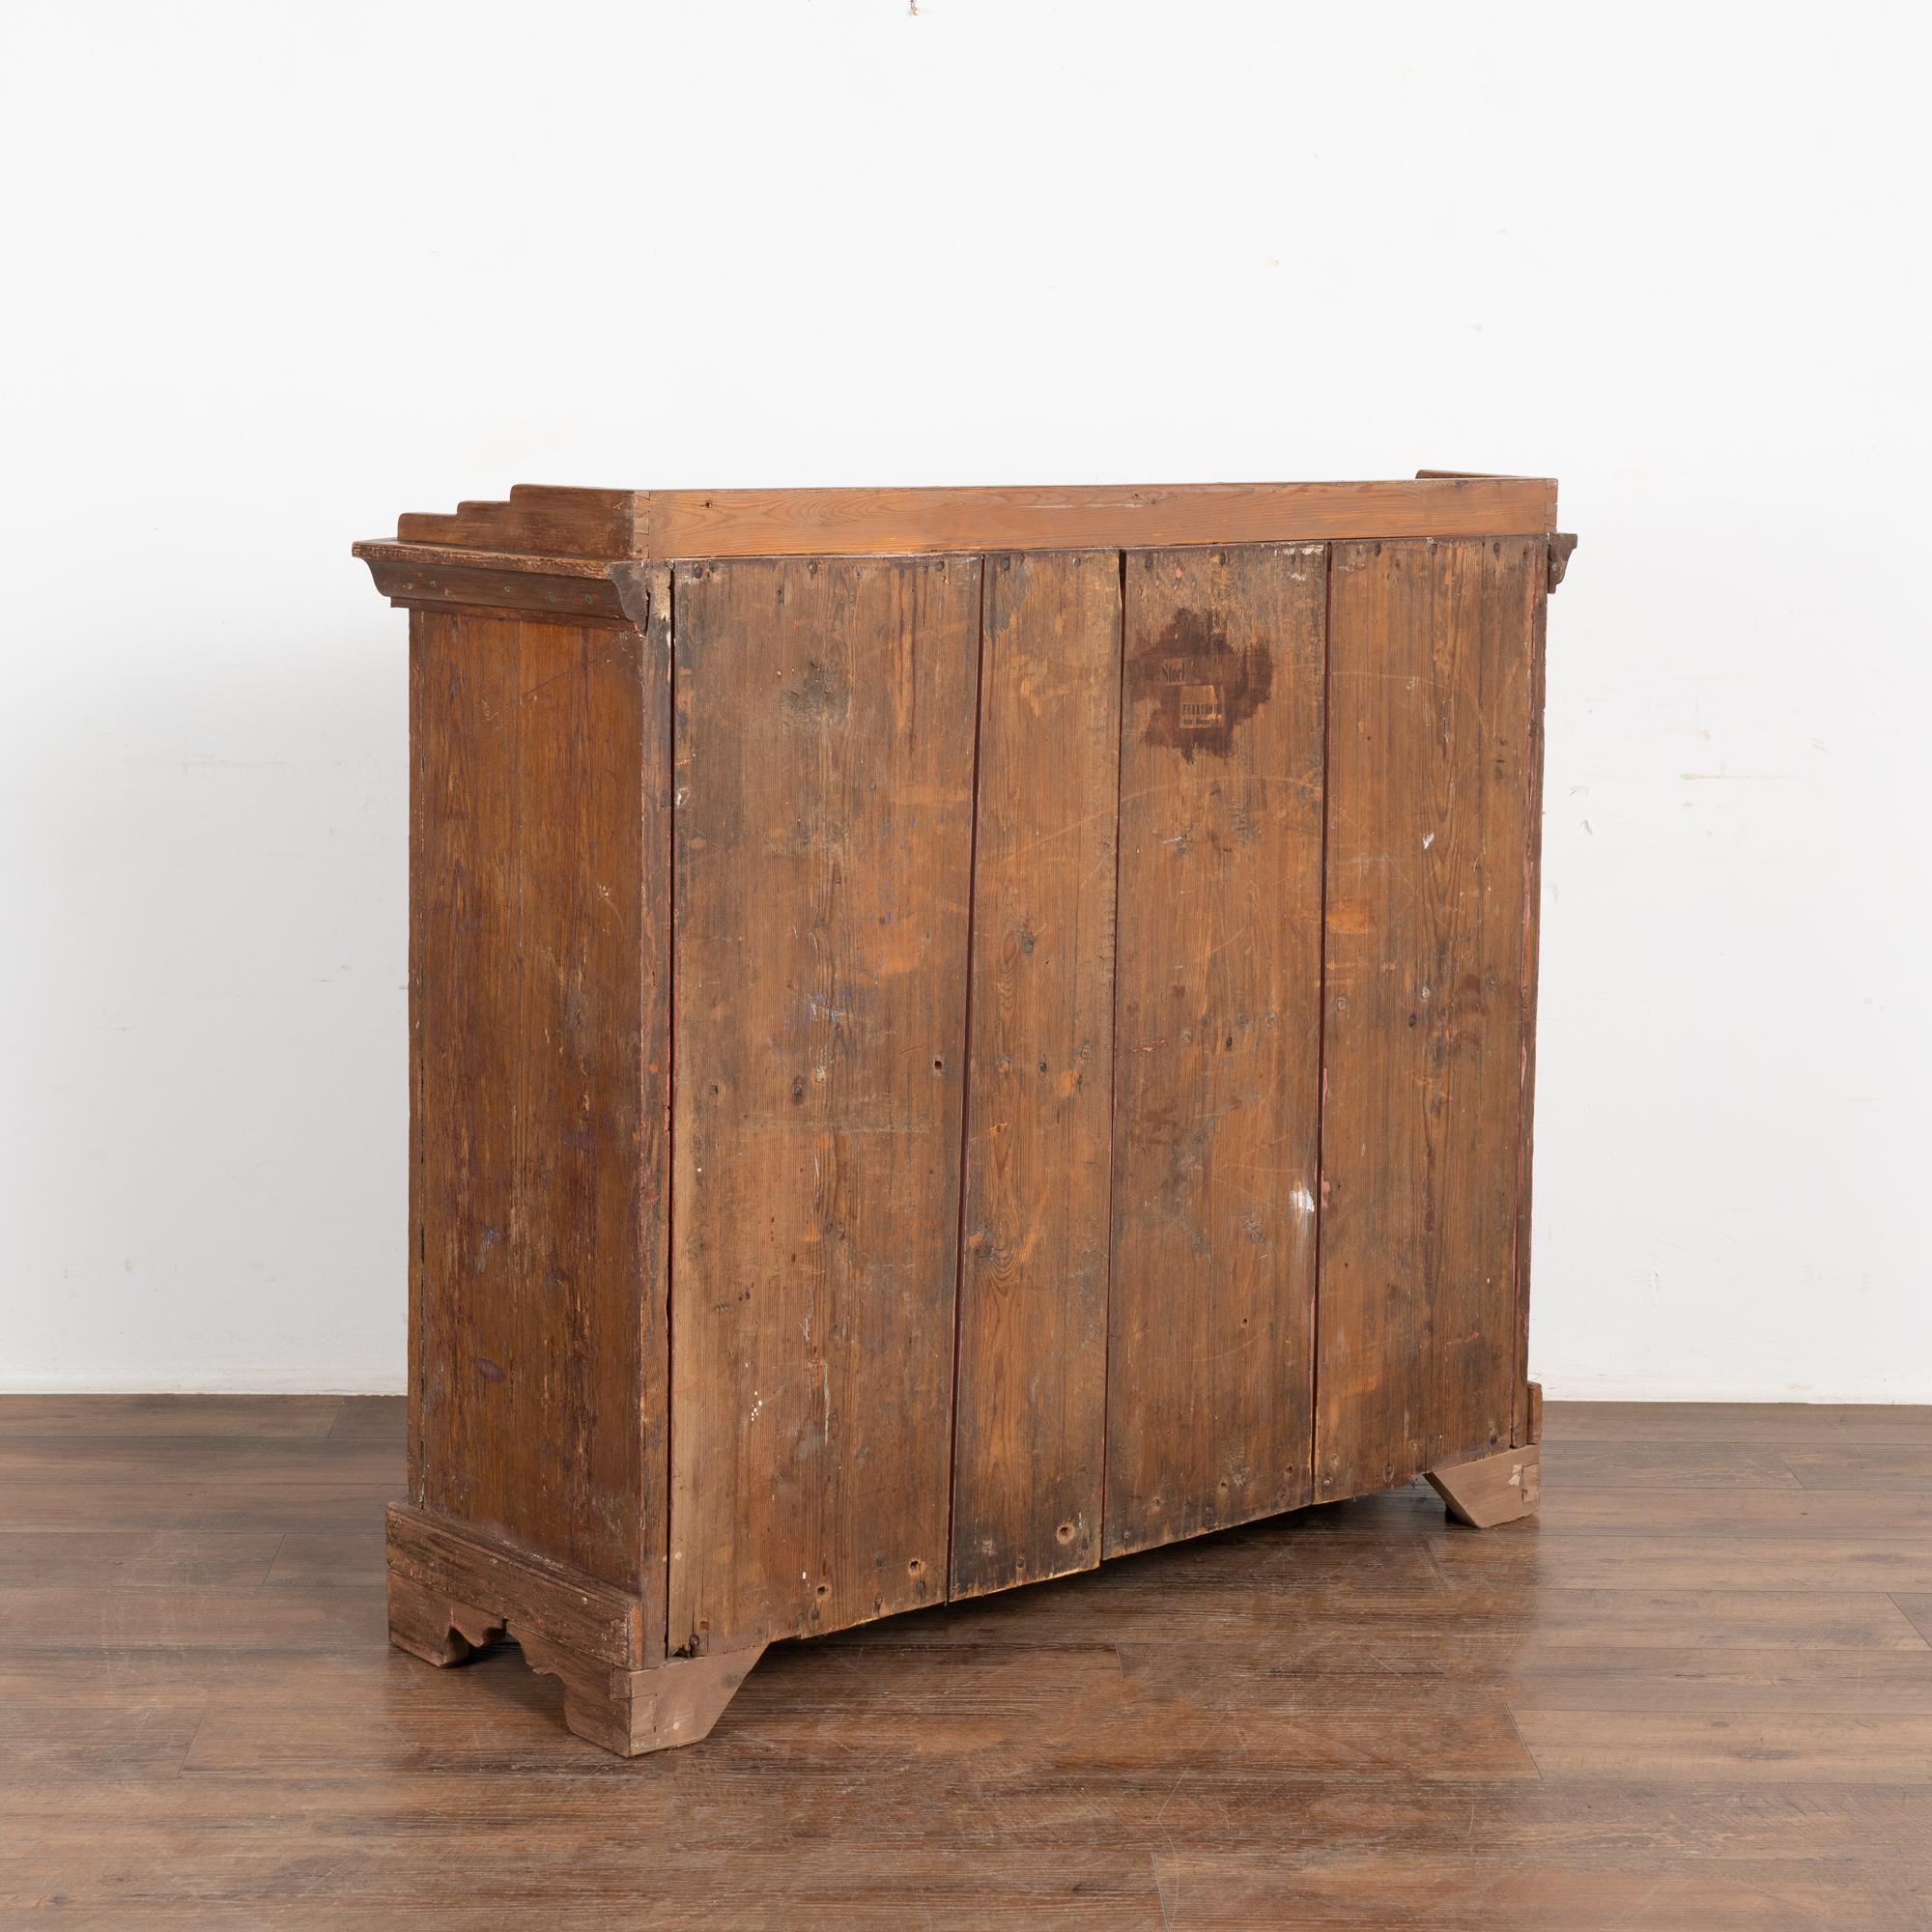 Original Painted Pine Sideboard Cabinet, Sweden circa 1820-40 For Sale 5